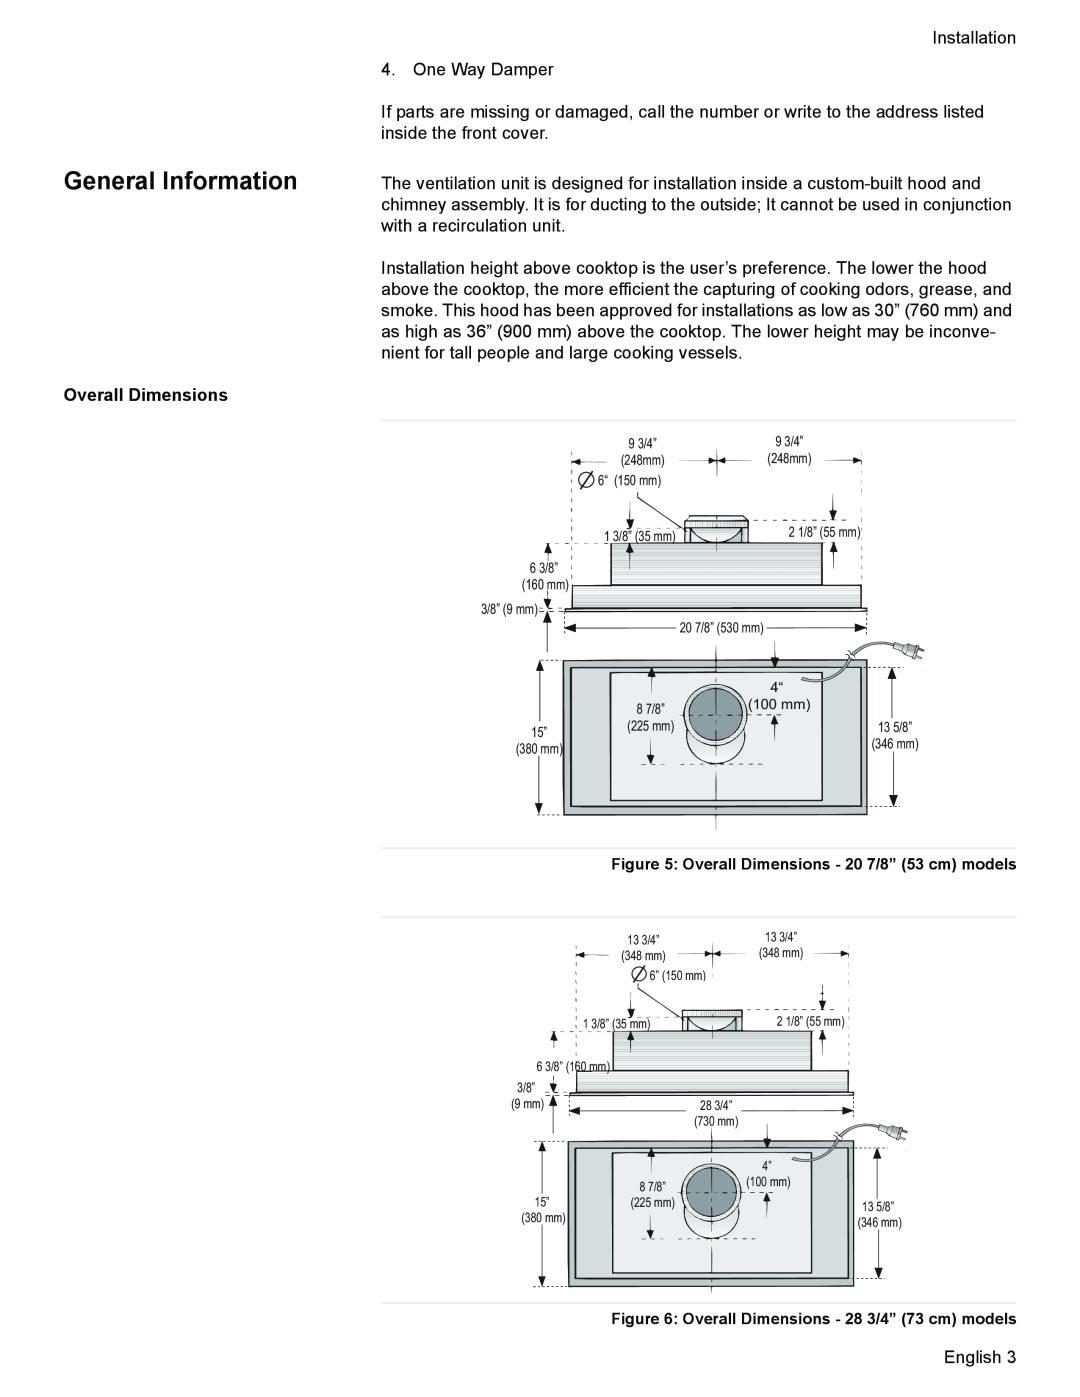 Bosch Appliances DHL 755 B installation manual General Information, Overall Dimensions 